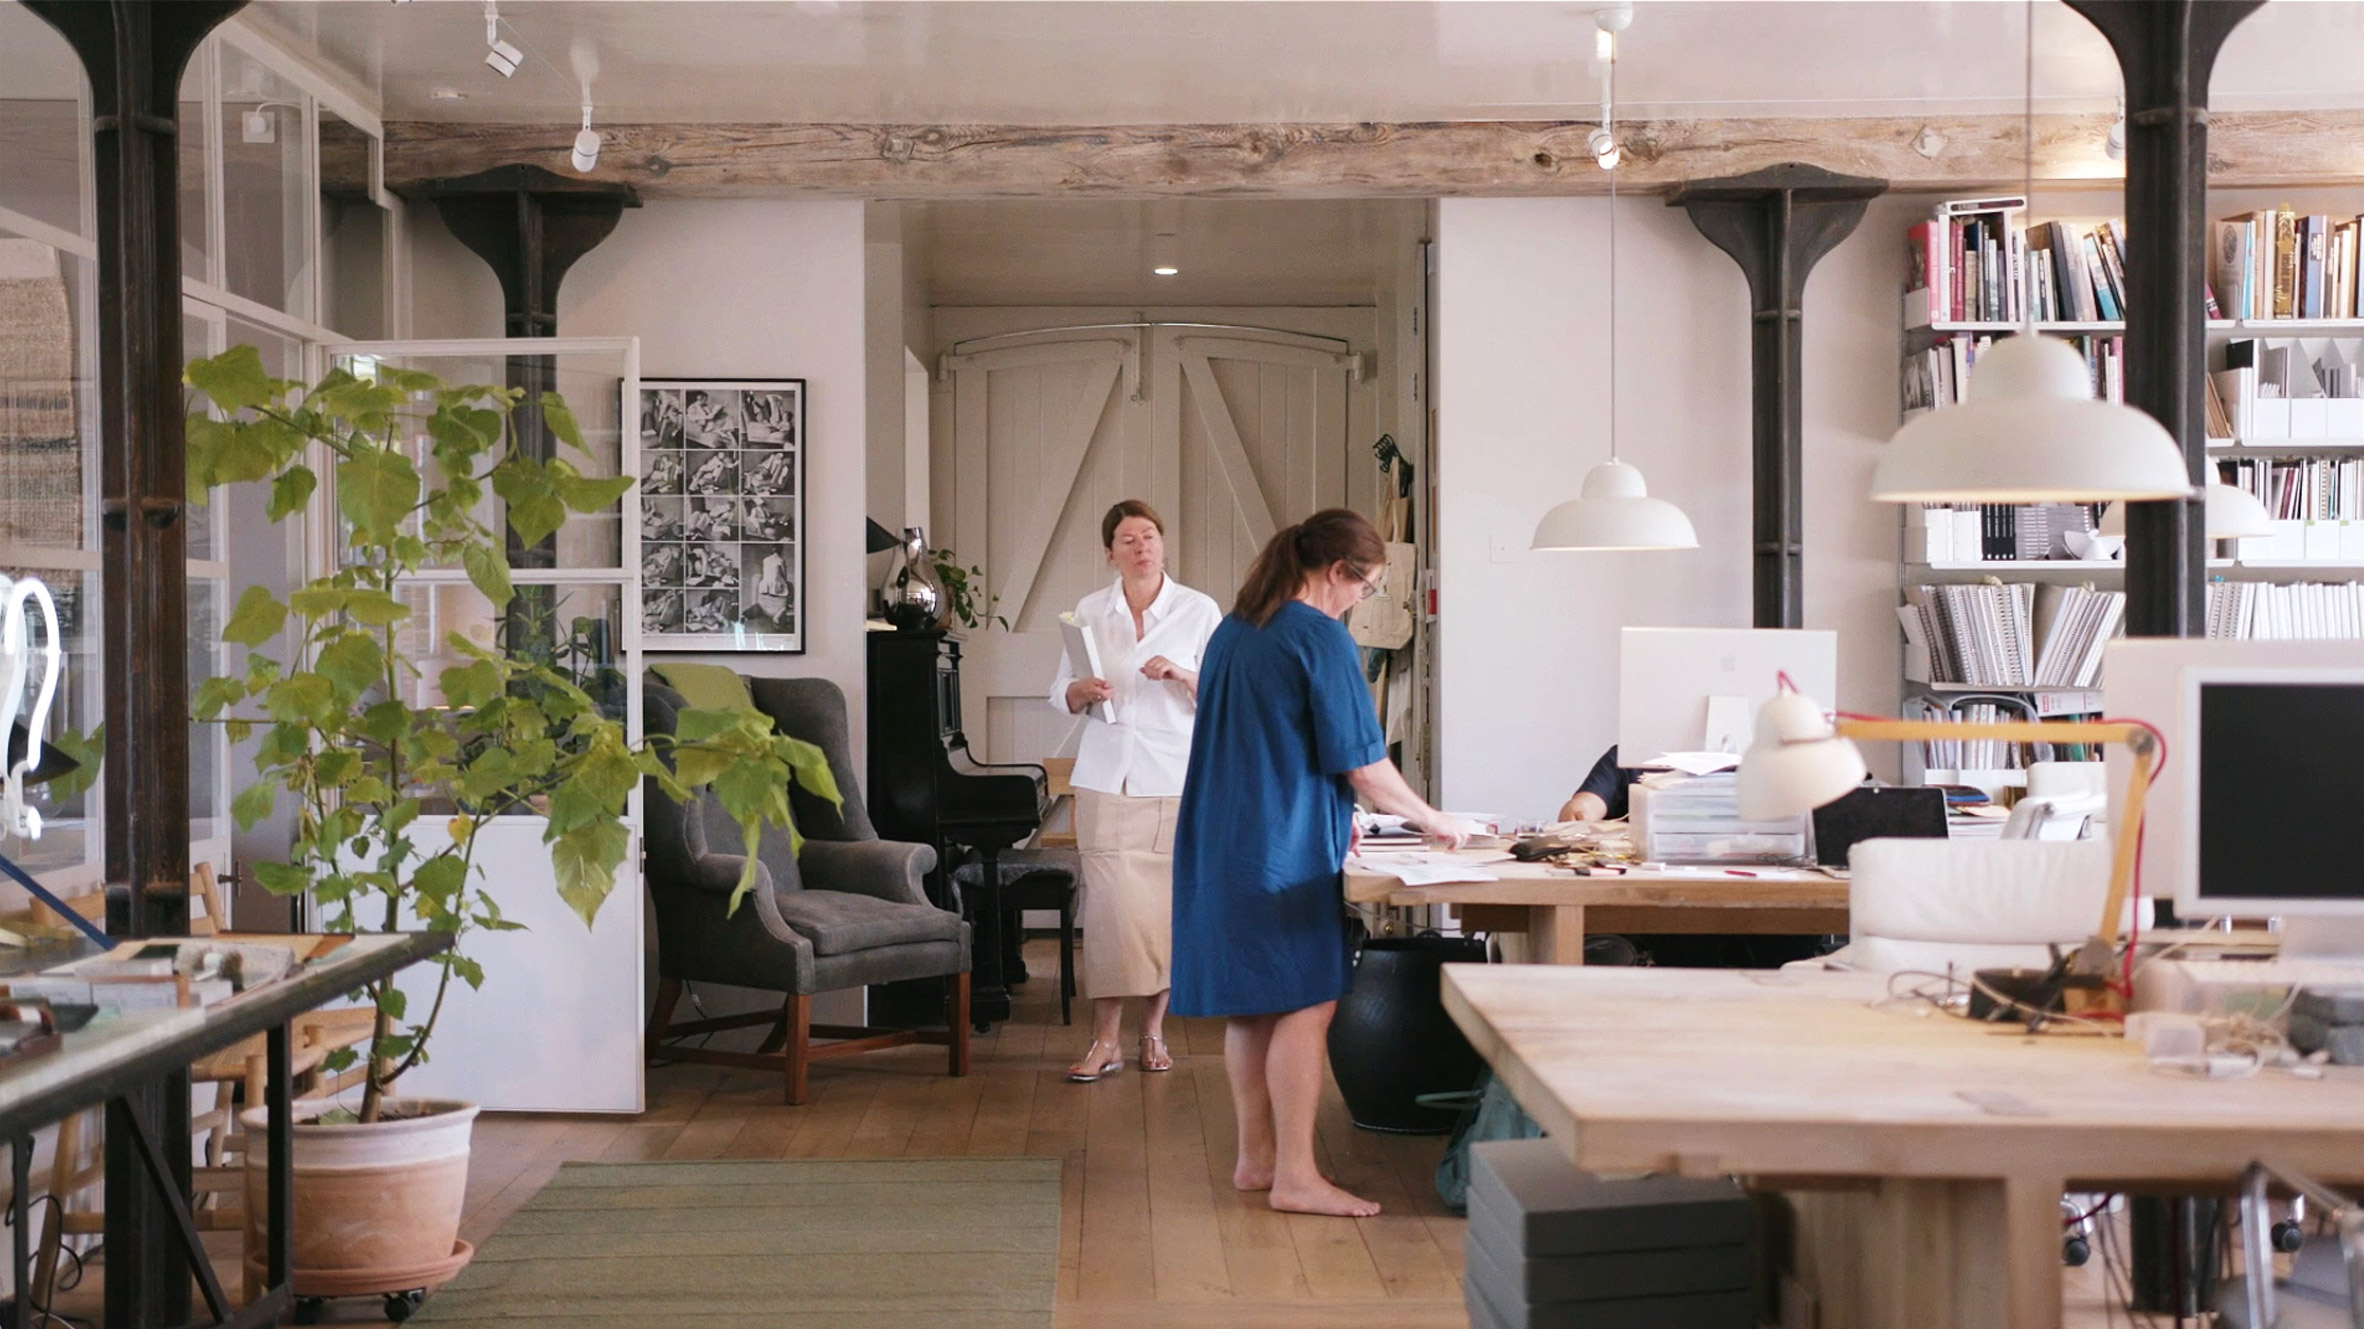 Ilse Crawford discusses design and wellbeing in short film by Vola